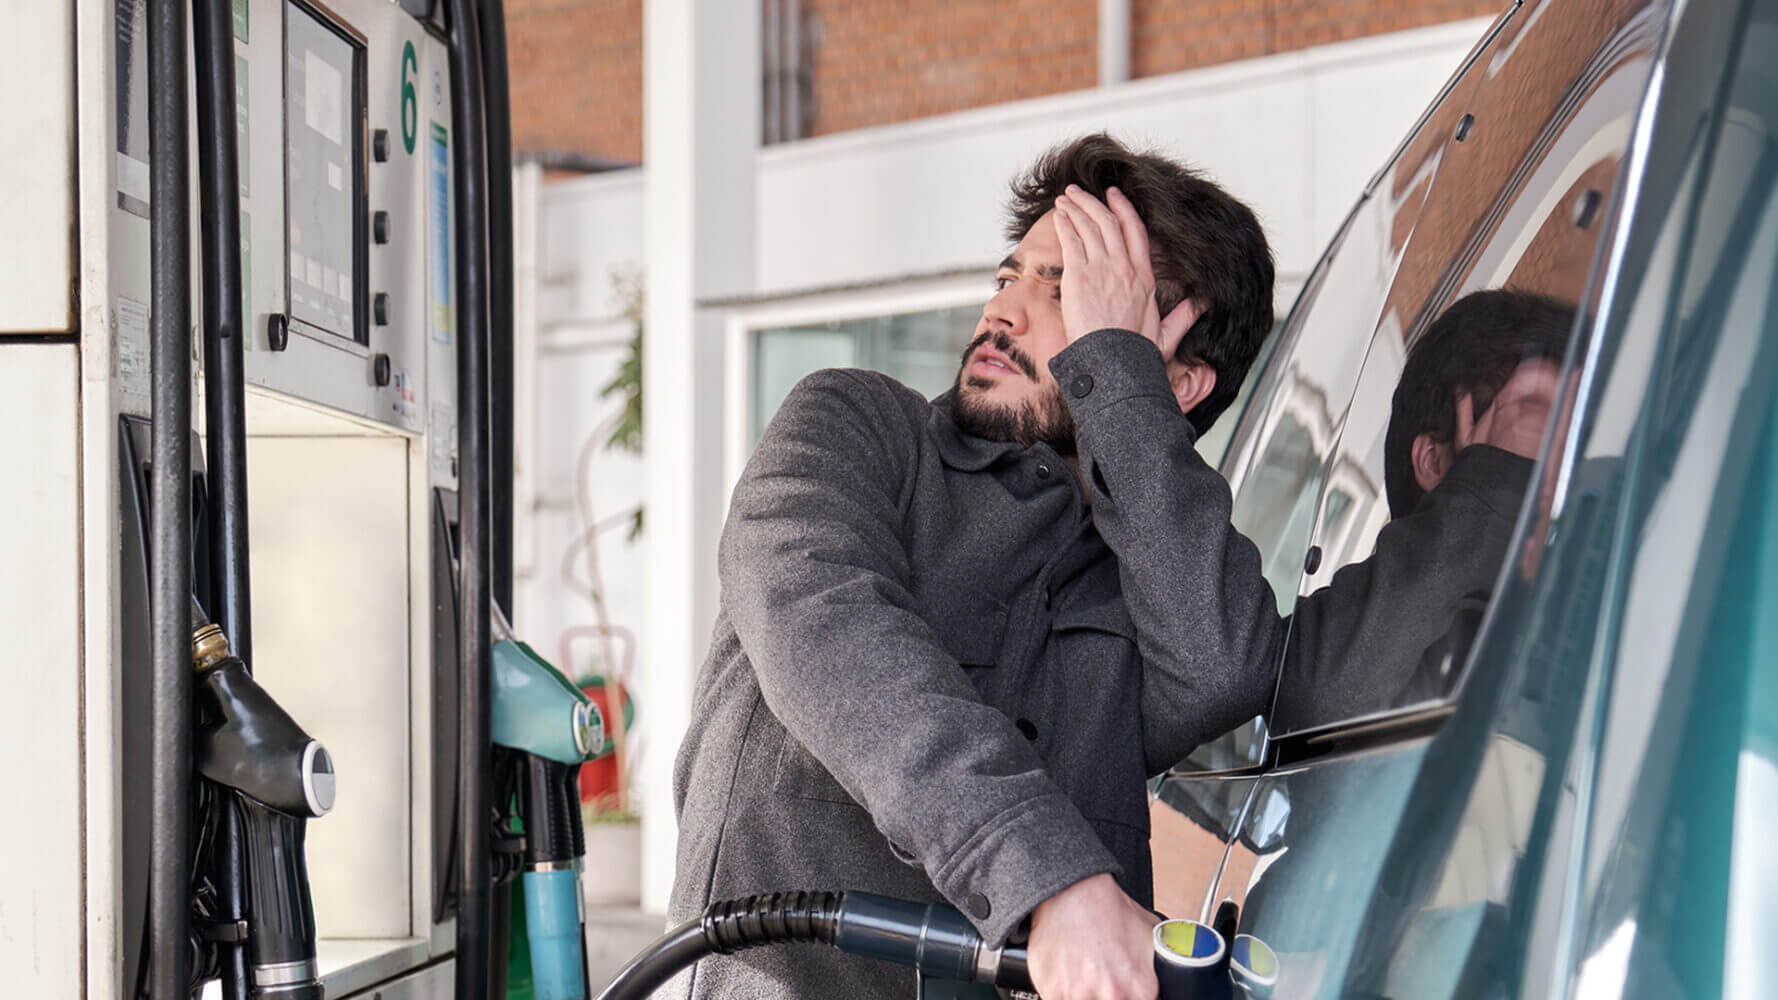 Man looks shocked as he notices the prevalence of inflation in high gas prices.